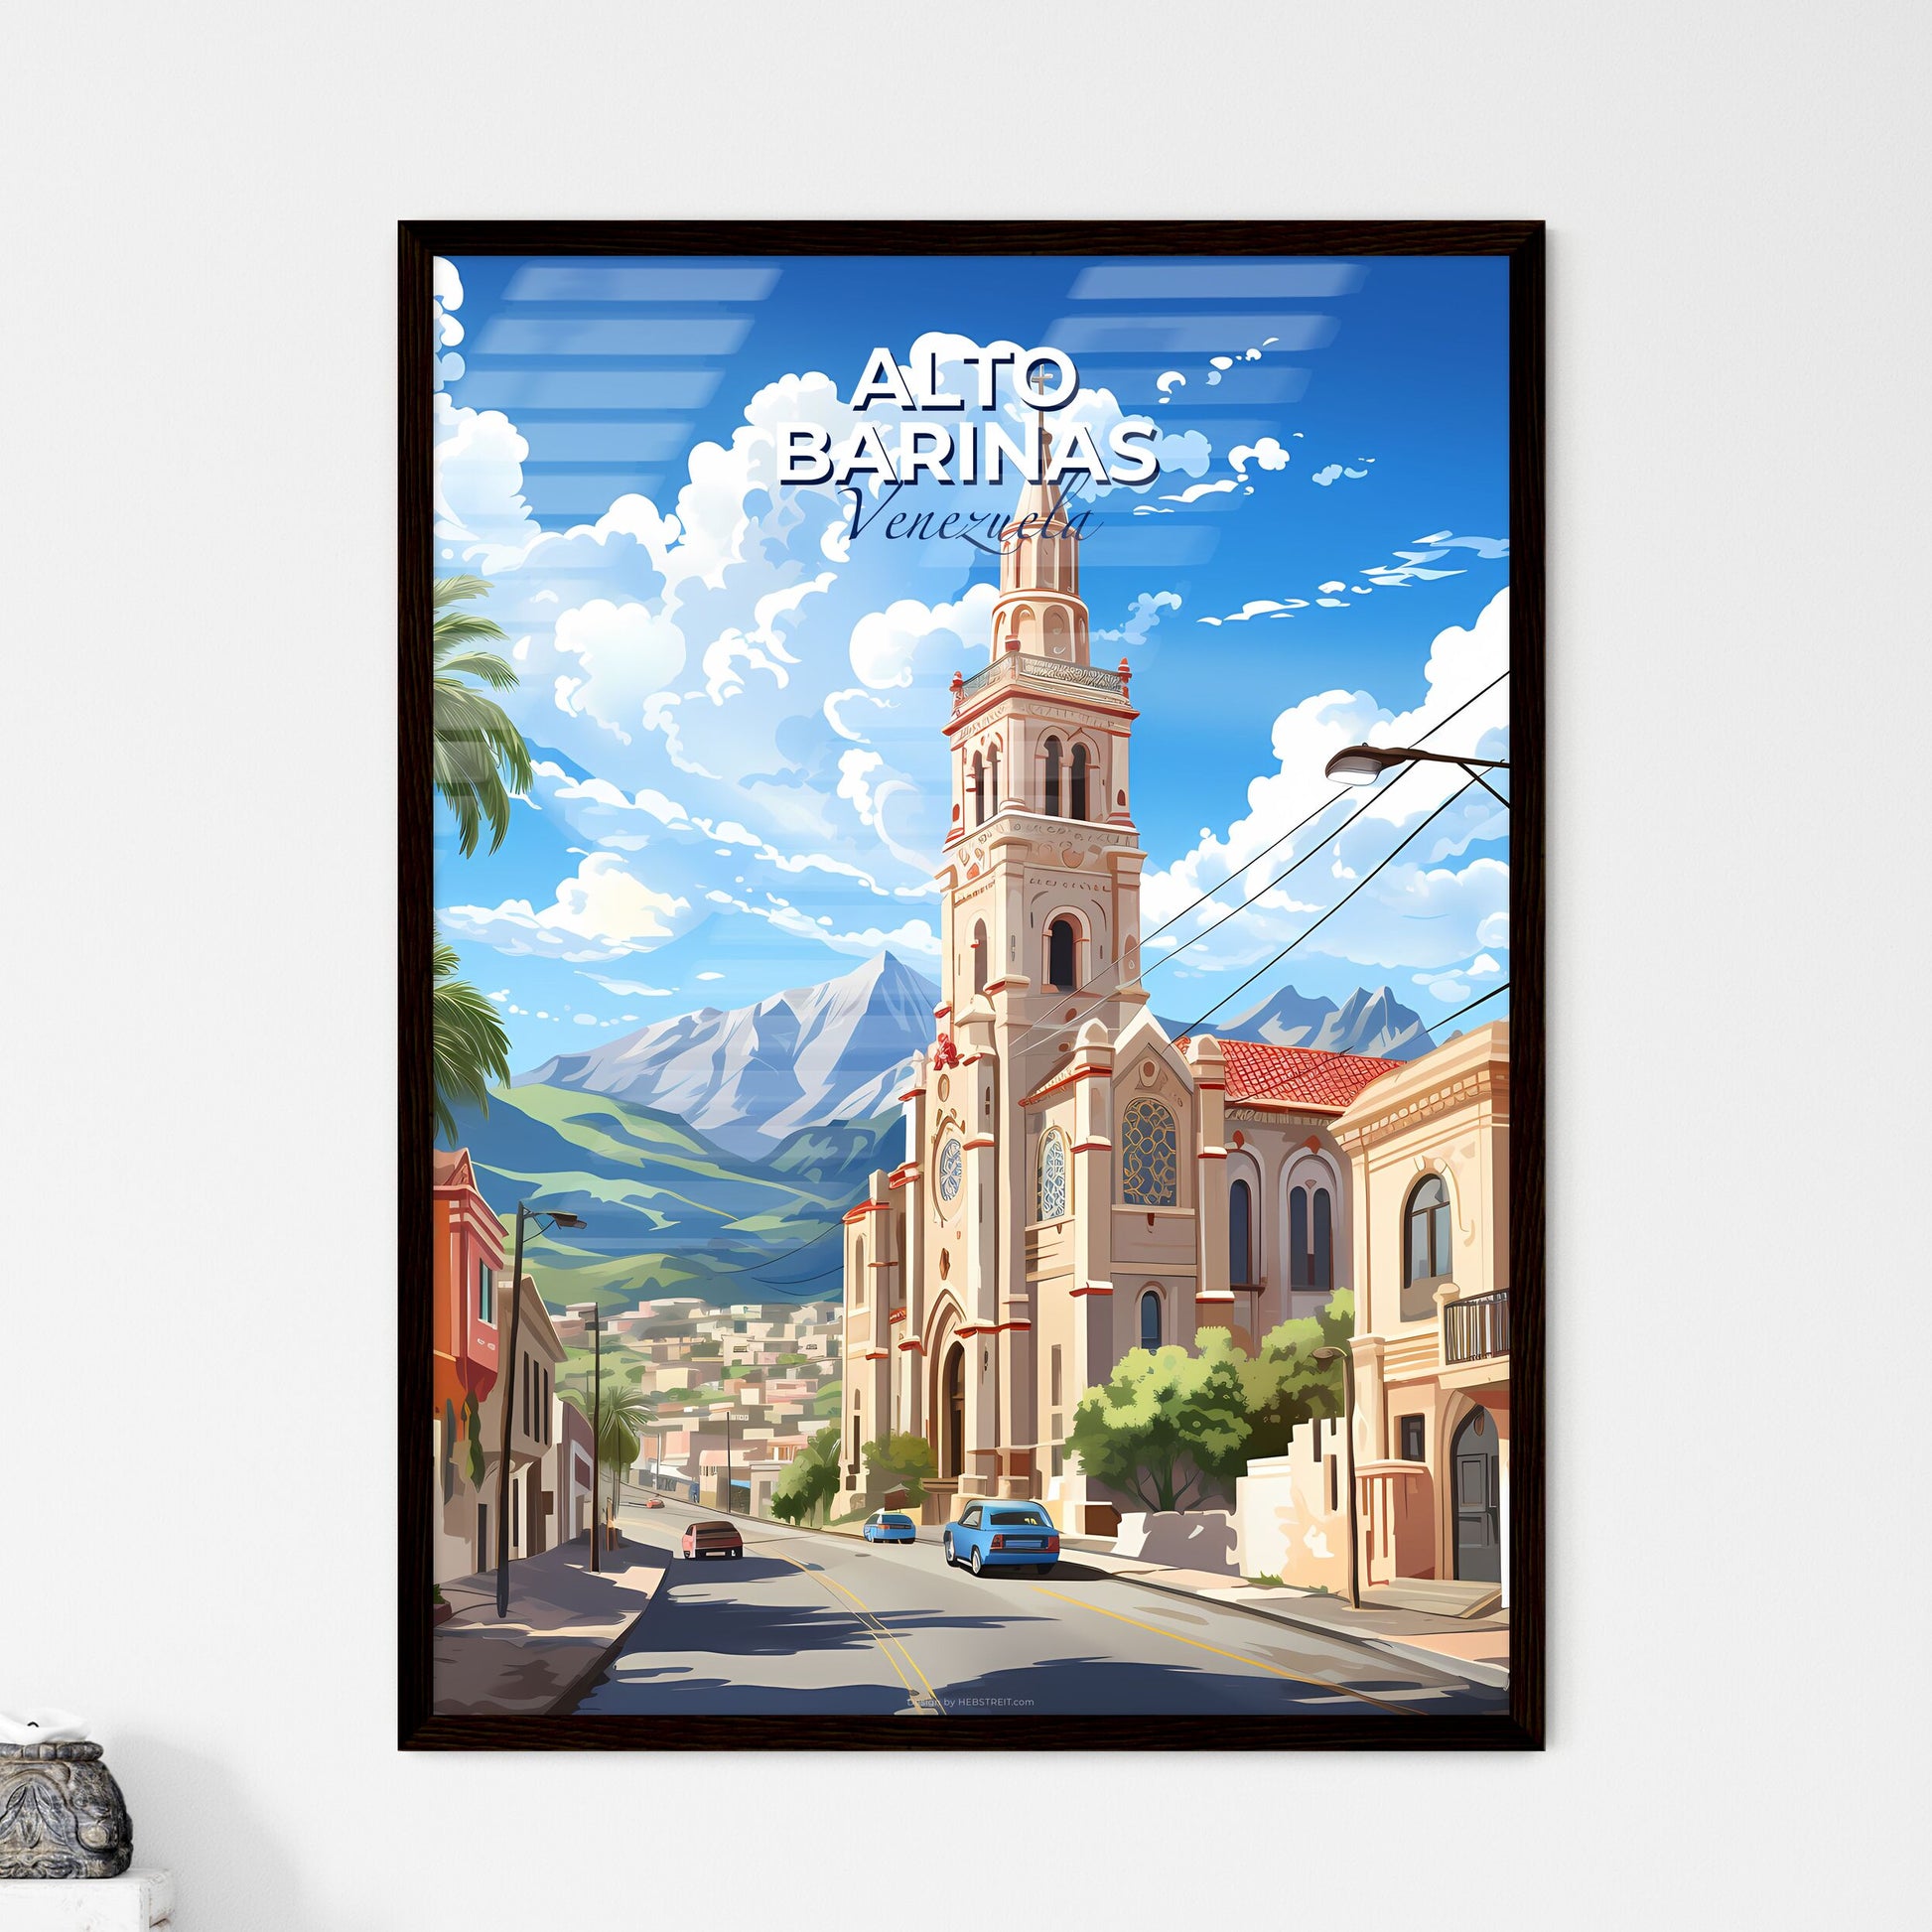 Vibrant Artistic Cityscape Painting: Alto Barinas Venezuela Skyline with Church Steeple and Palm Trees Default Title